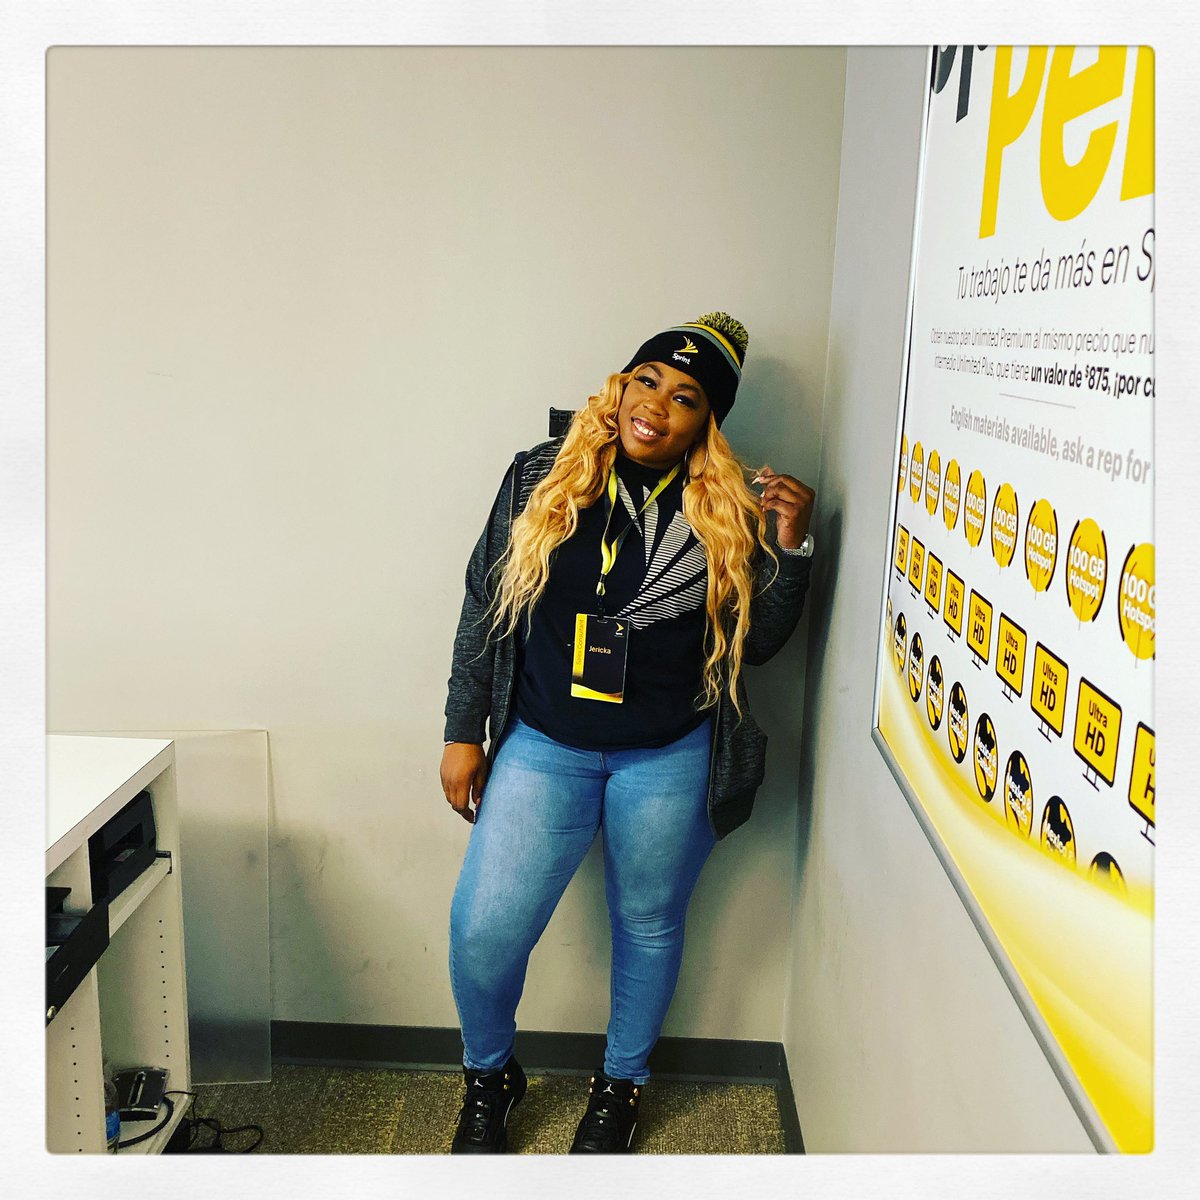 During this pandemic I still have to pat myself on the back.. You are looking at one of the new ASM at 1787!! We don’t understand why he shifts us but 2 promotion in 11 months I’m so grateful it’s only up from here💃🏾 SUPER EXCITED for this opportunity #Sprintlife #Sprintrocks